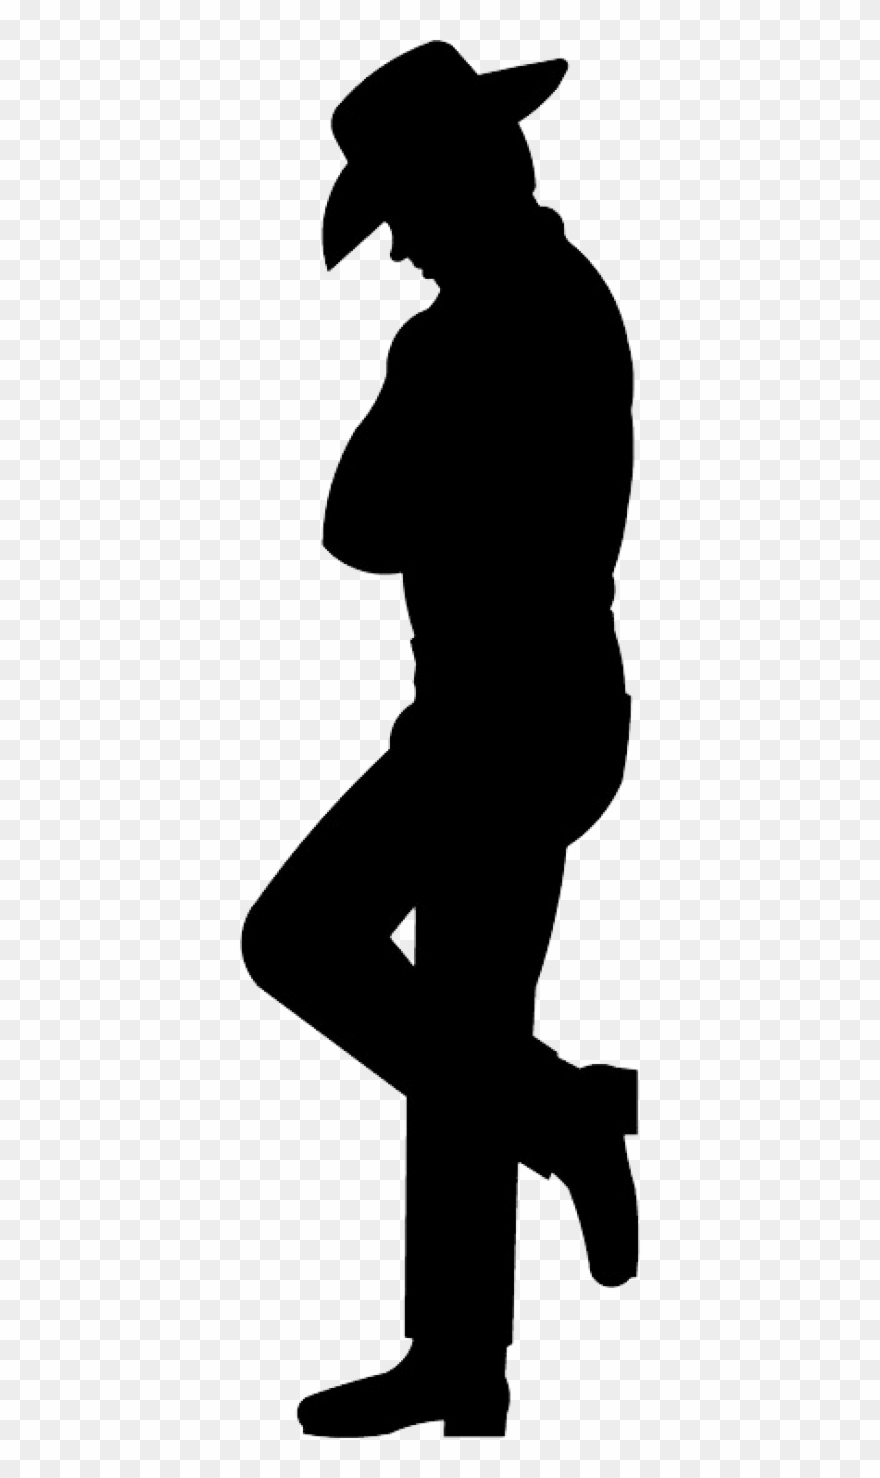 Cowboy silhouette png.